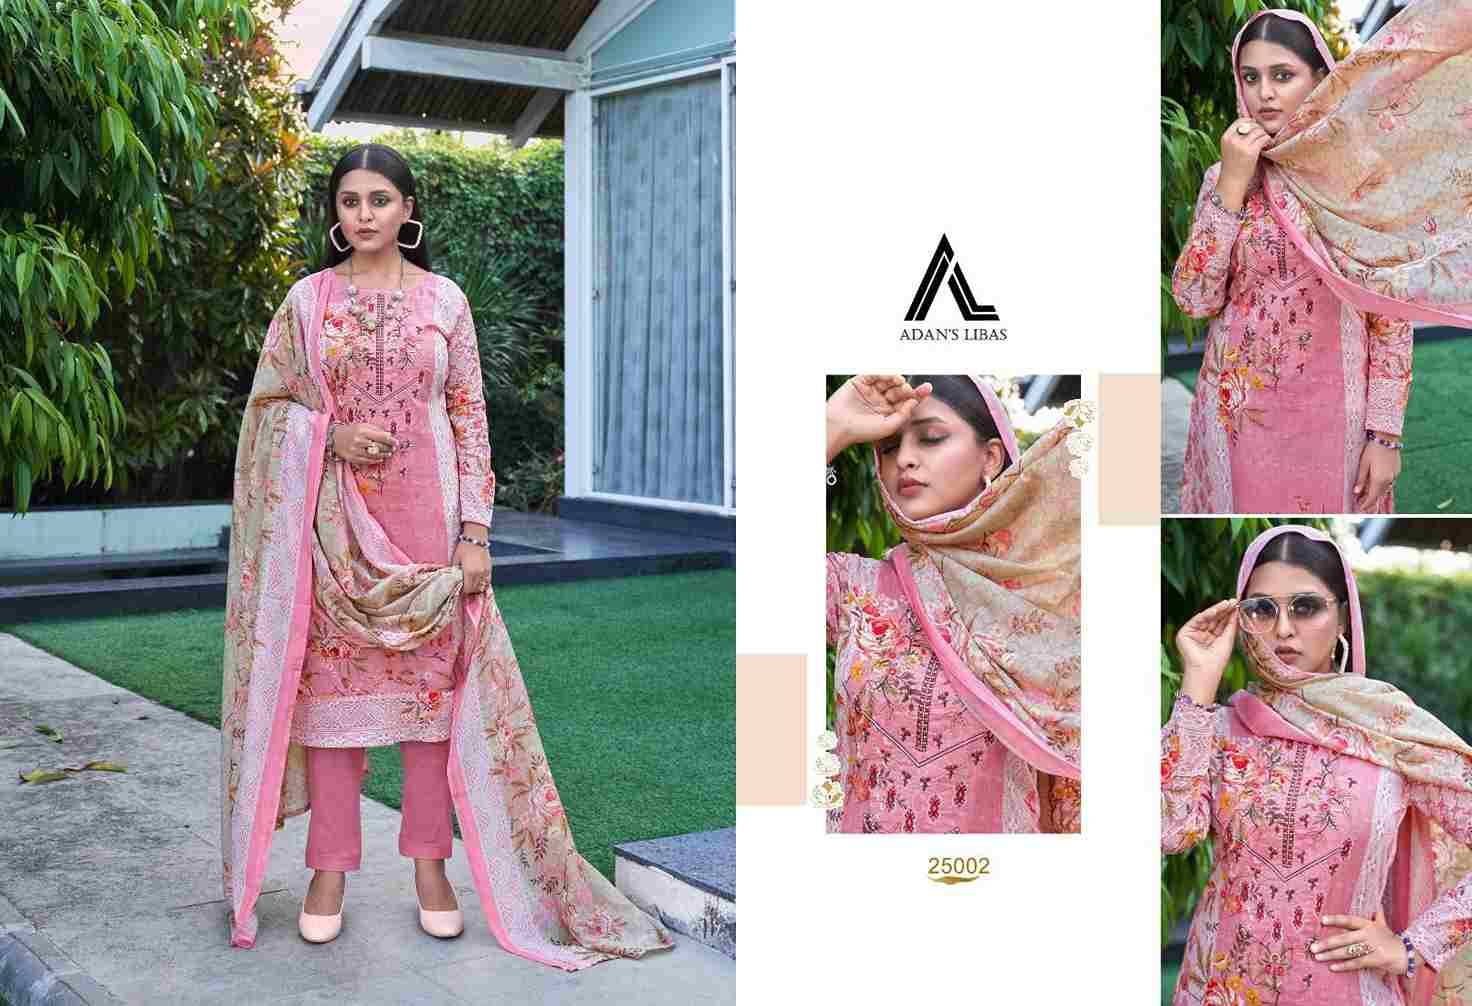 Naira Vol-25 By Adans Libas 25001 To 25008 Series Beautiful Festive Suits Stylish Fancy Colorful Casual Wear & Ethnic Wear Pure Cotton Print Dresses At Wholesale Price